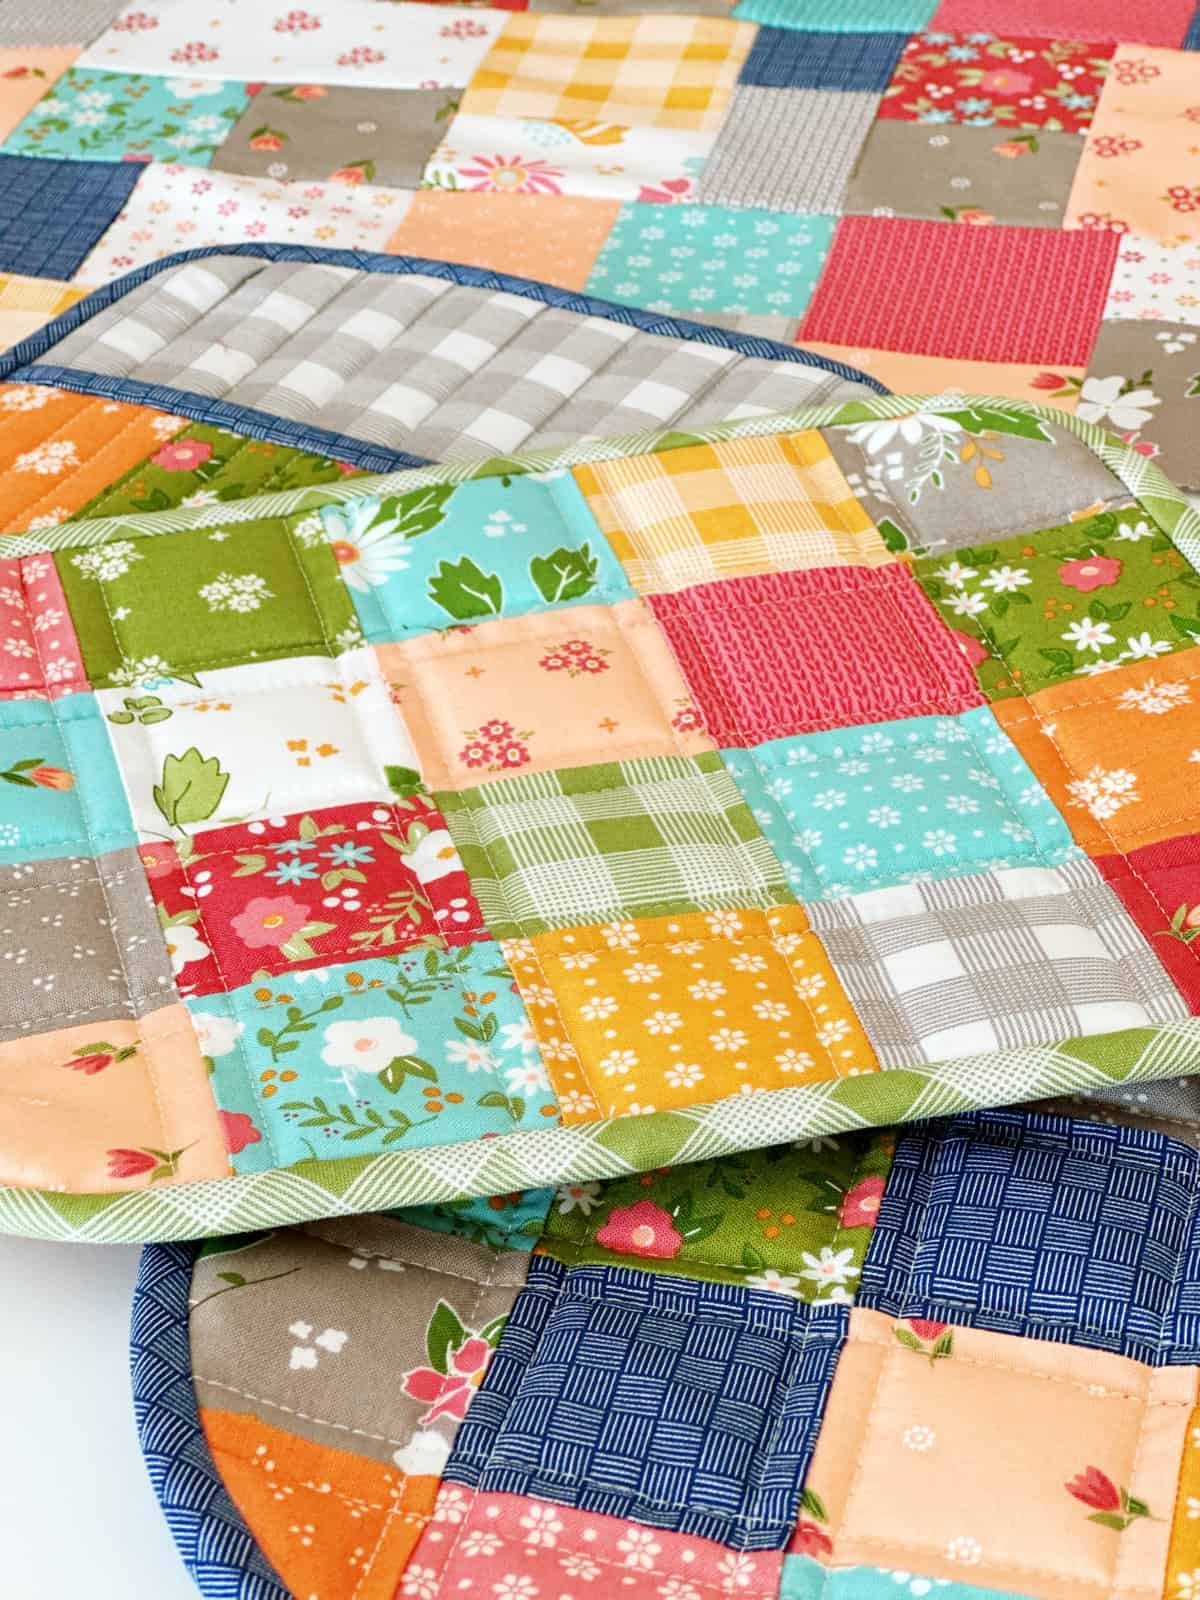 Quilted patchwork potholders and table runner in Bountiful Blooms fabrics by Sherri & Chelsi for Moda fabrics